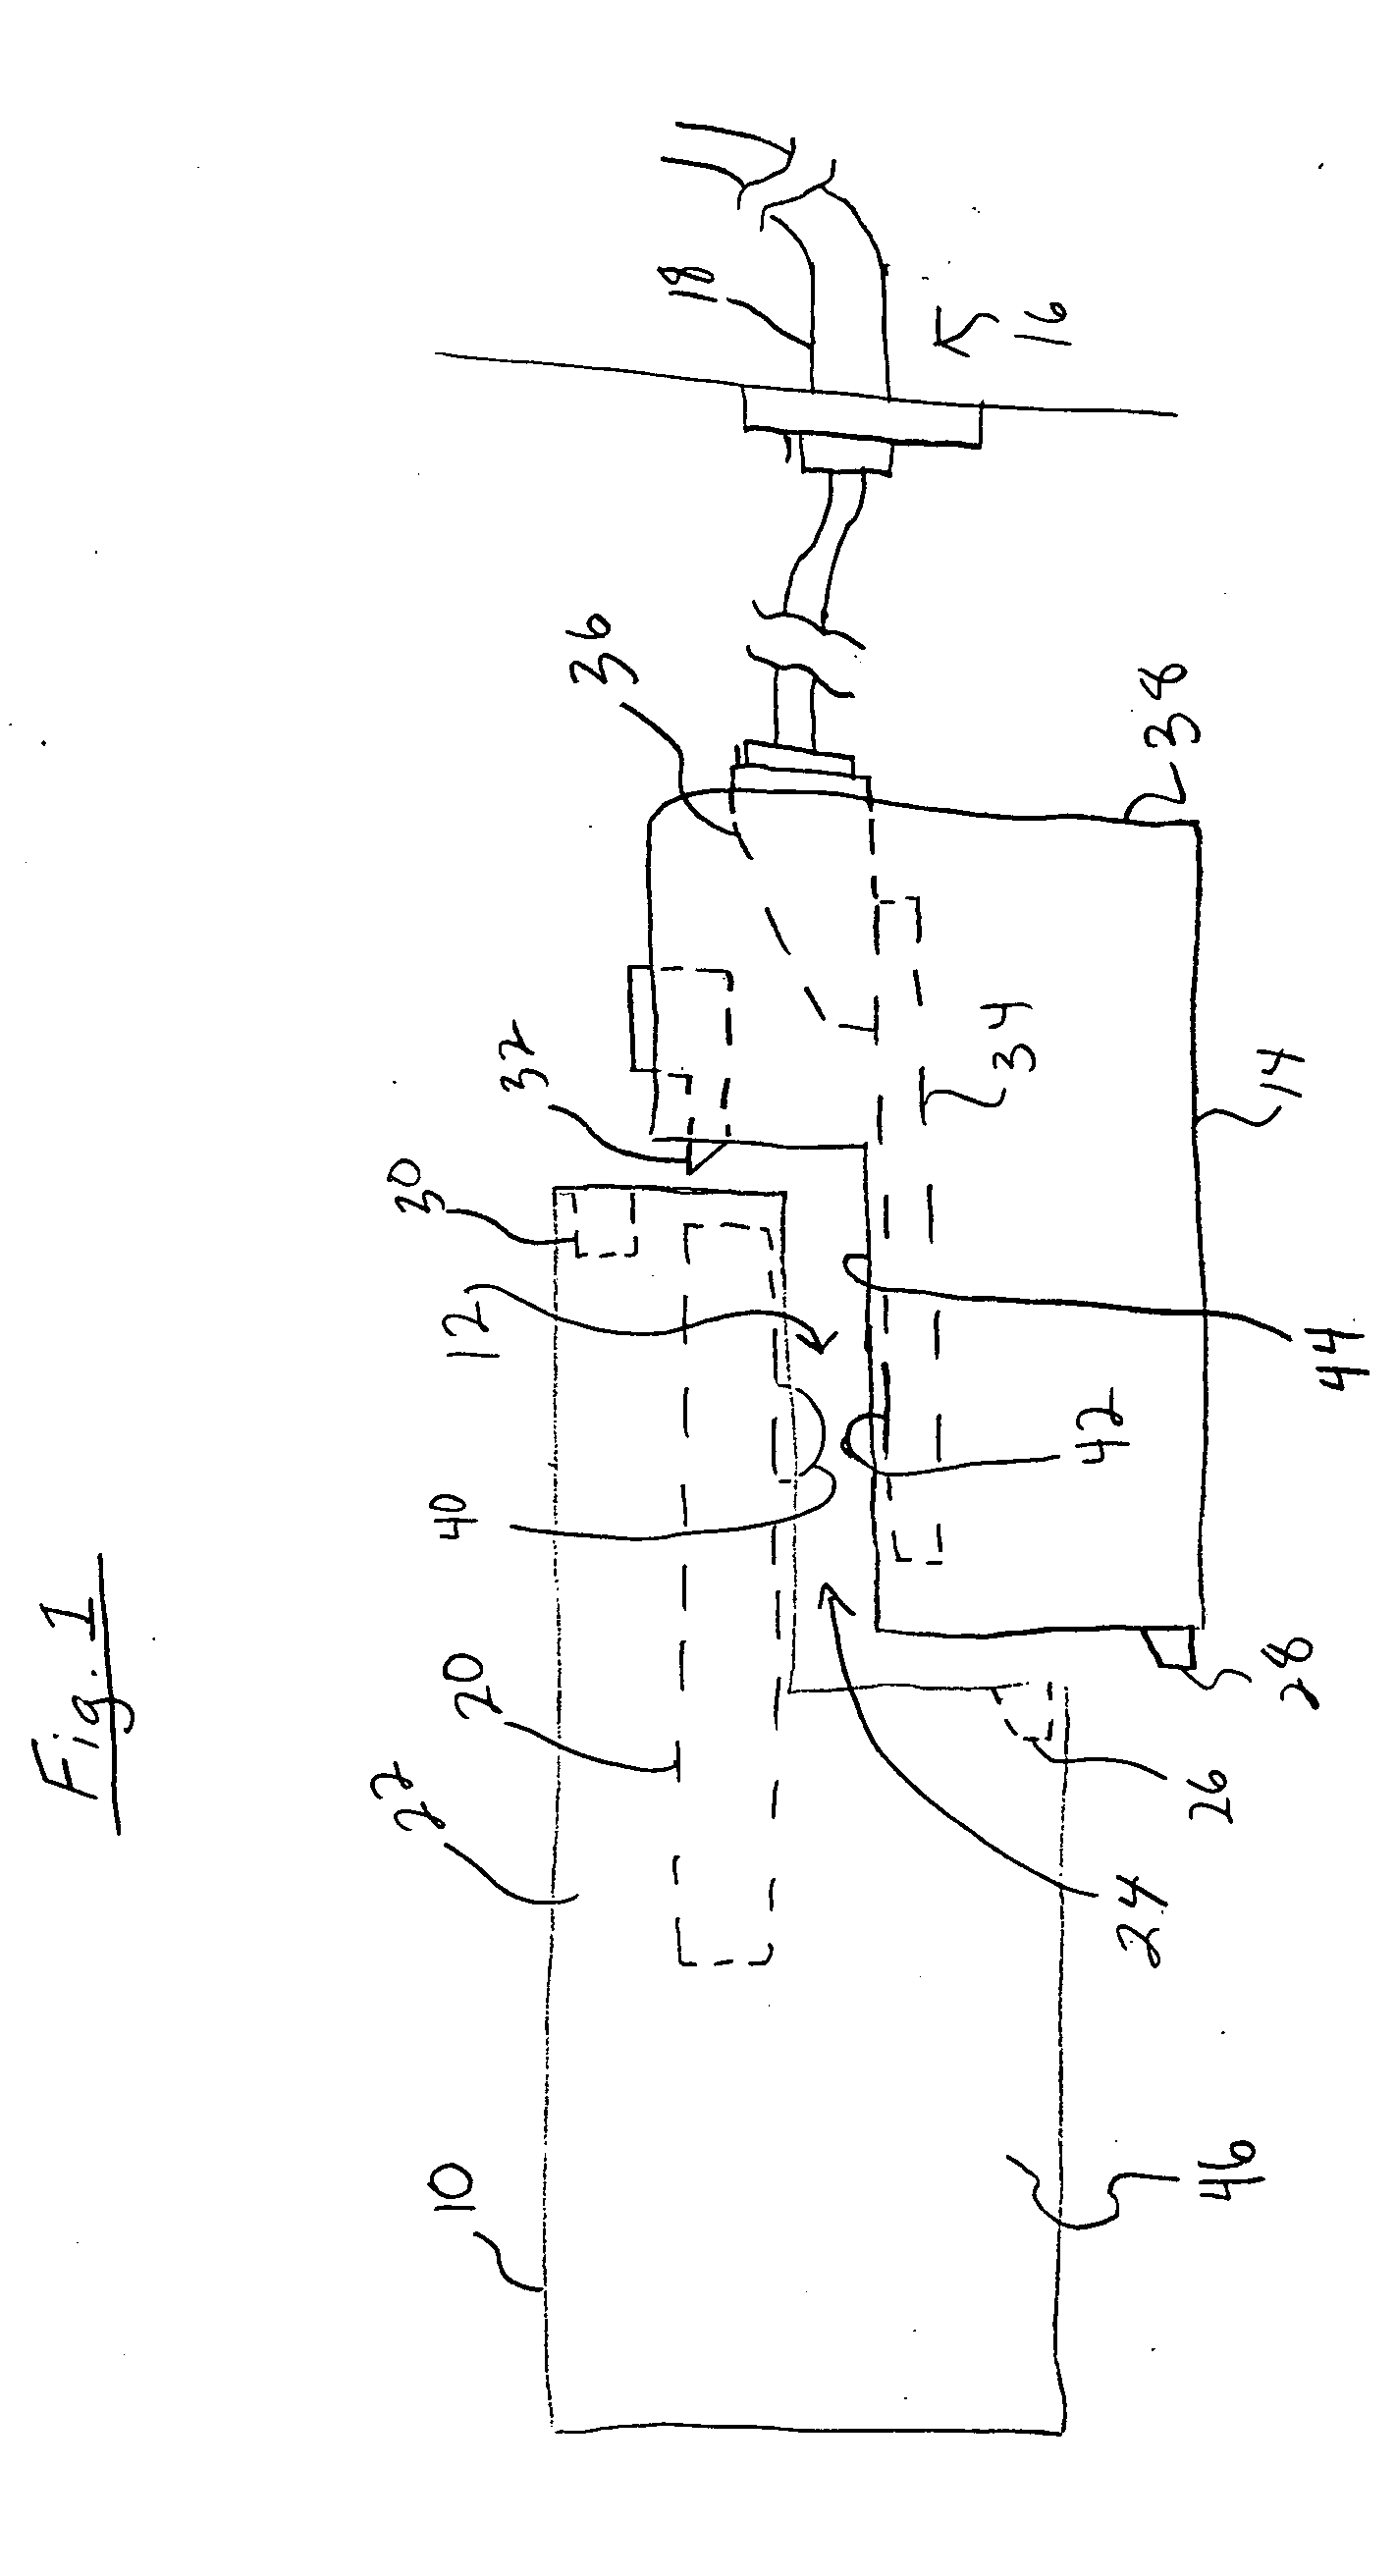 Measurement connector for test device